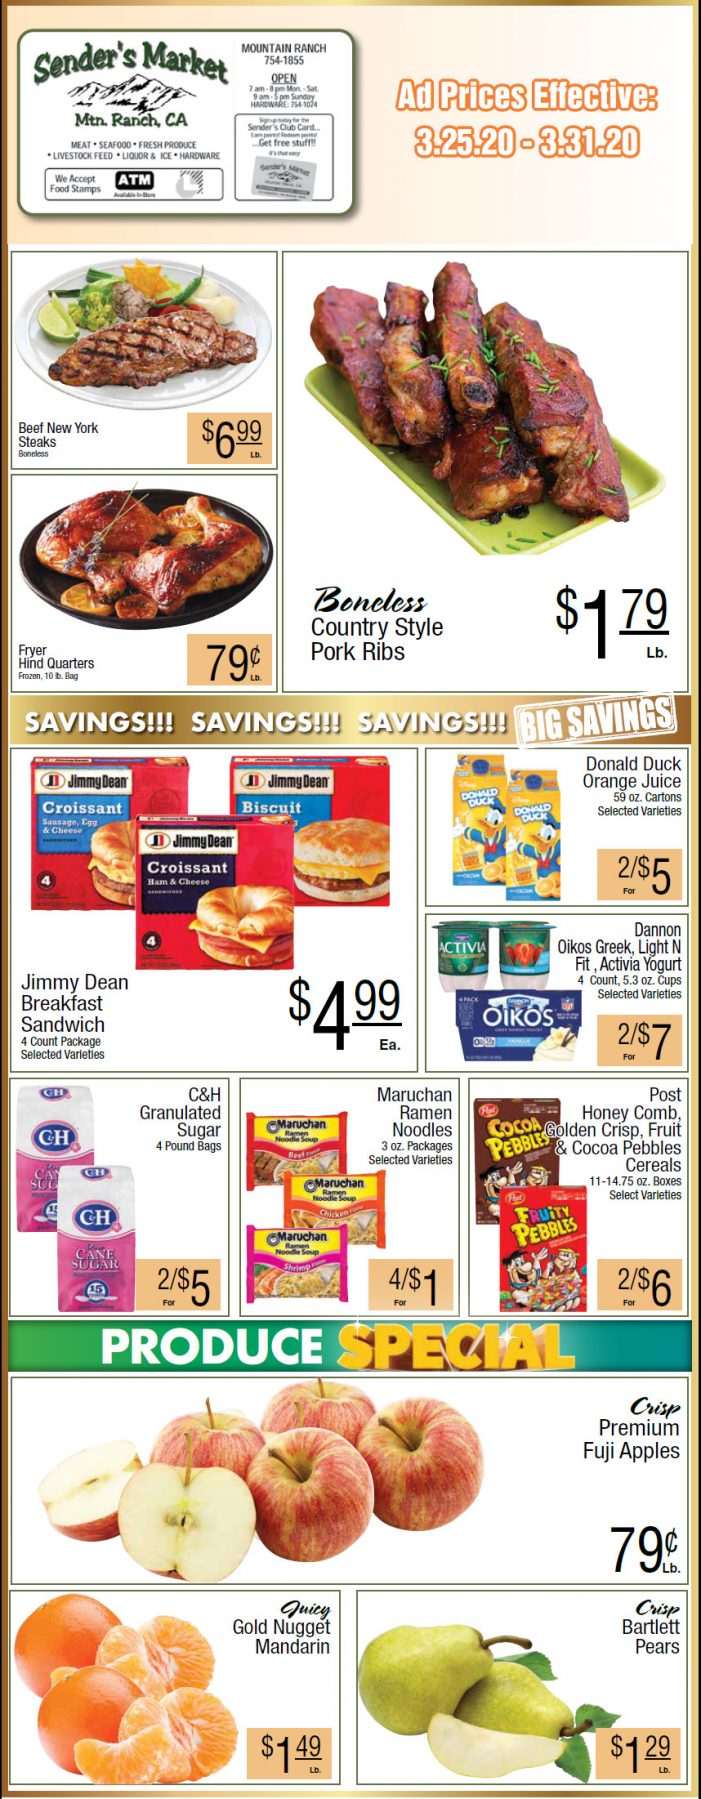 Sender’s Market’s Weekly Ad & Grocery Specials Through March 31st